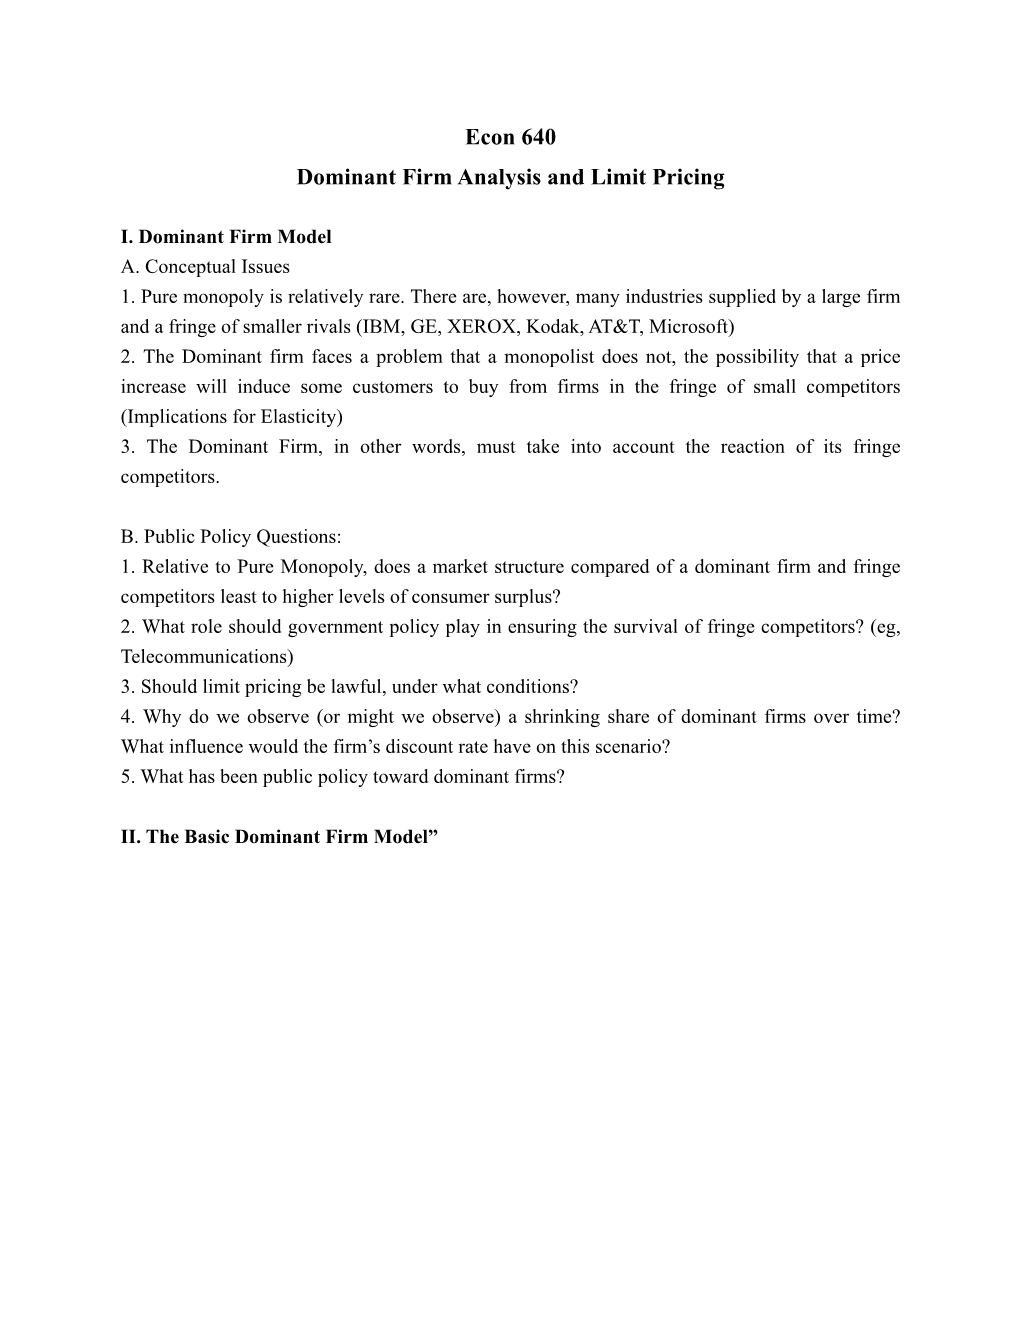 Econ 640 Dominant Firm Analysis and Limit Pricing